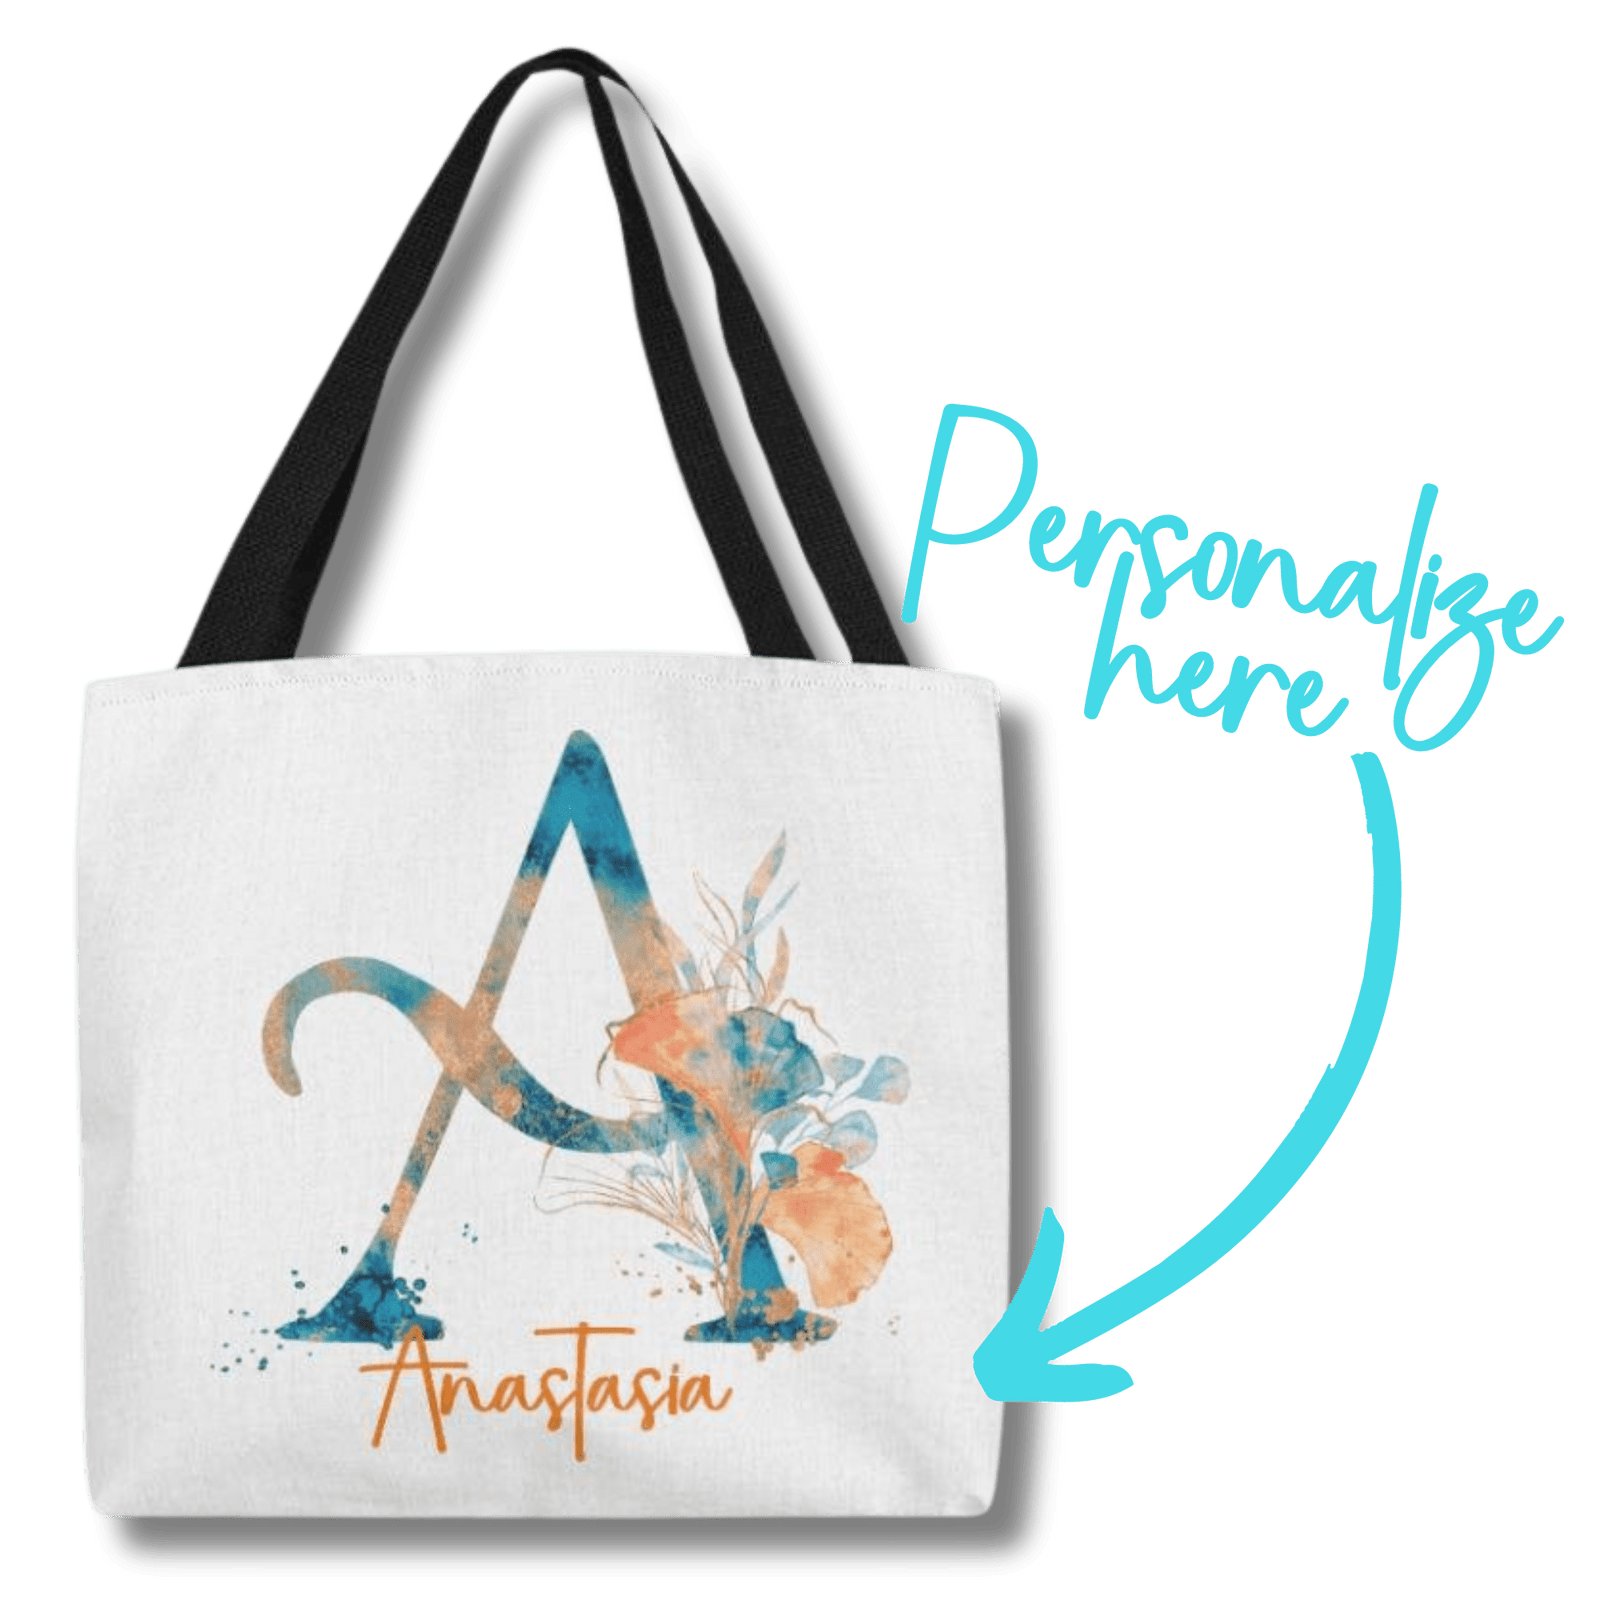 PERSONALIZABLE TOTE BAG | MONOGRAM - A | PERFECT GIFT for MOM, BFF or YOU